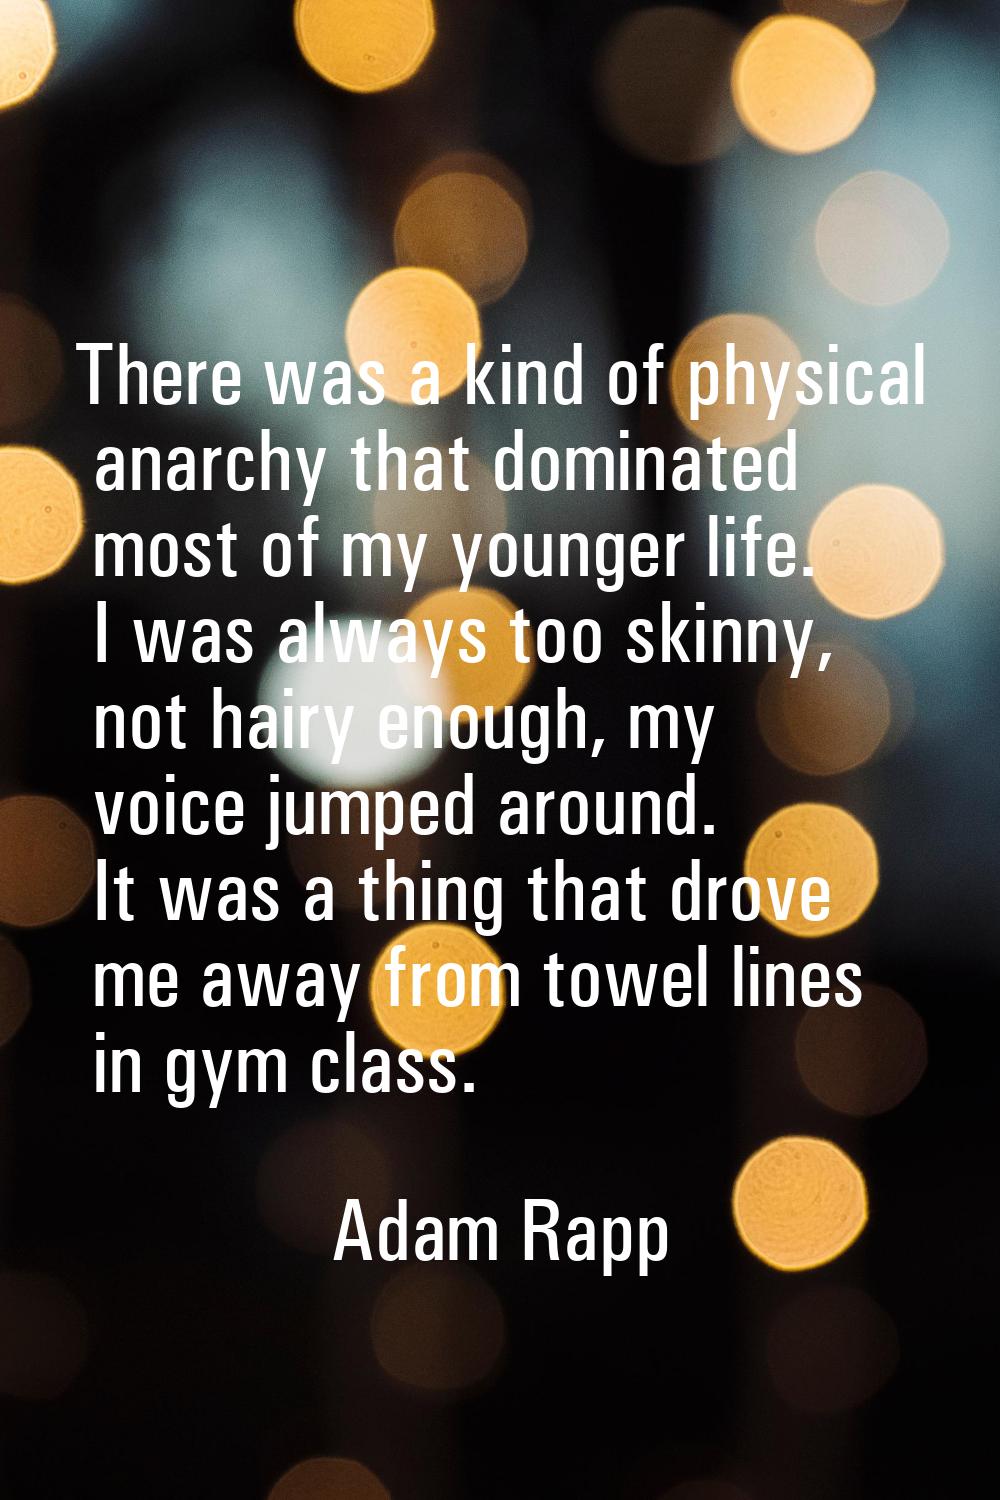 There was a kind of physical anarchy that dominated most of my younger life. I was always too skinn